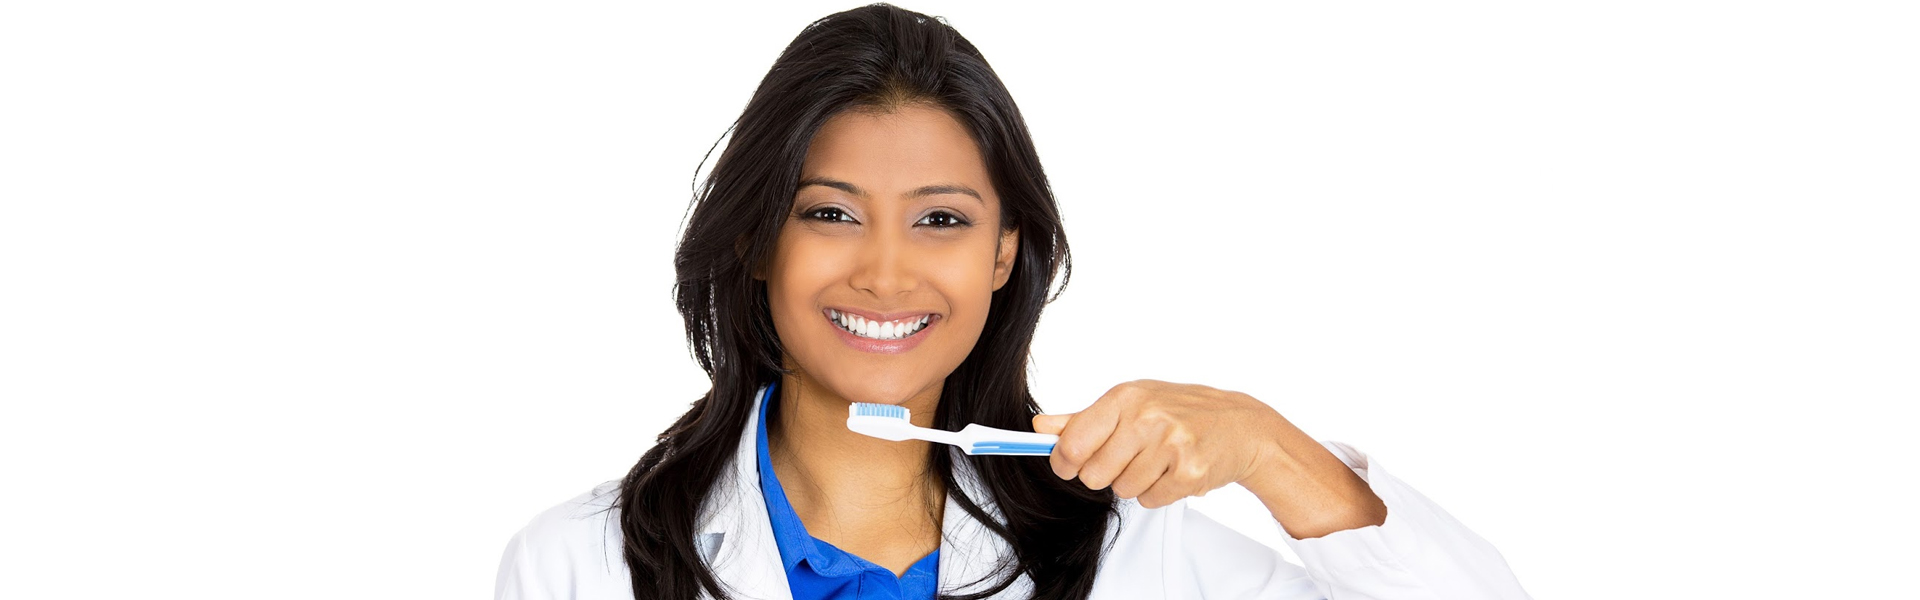 What Are the Procedures Performed by an Endodontist?